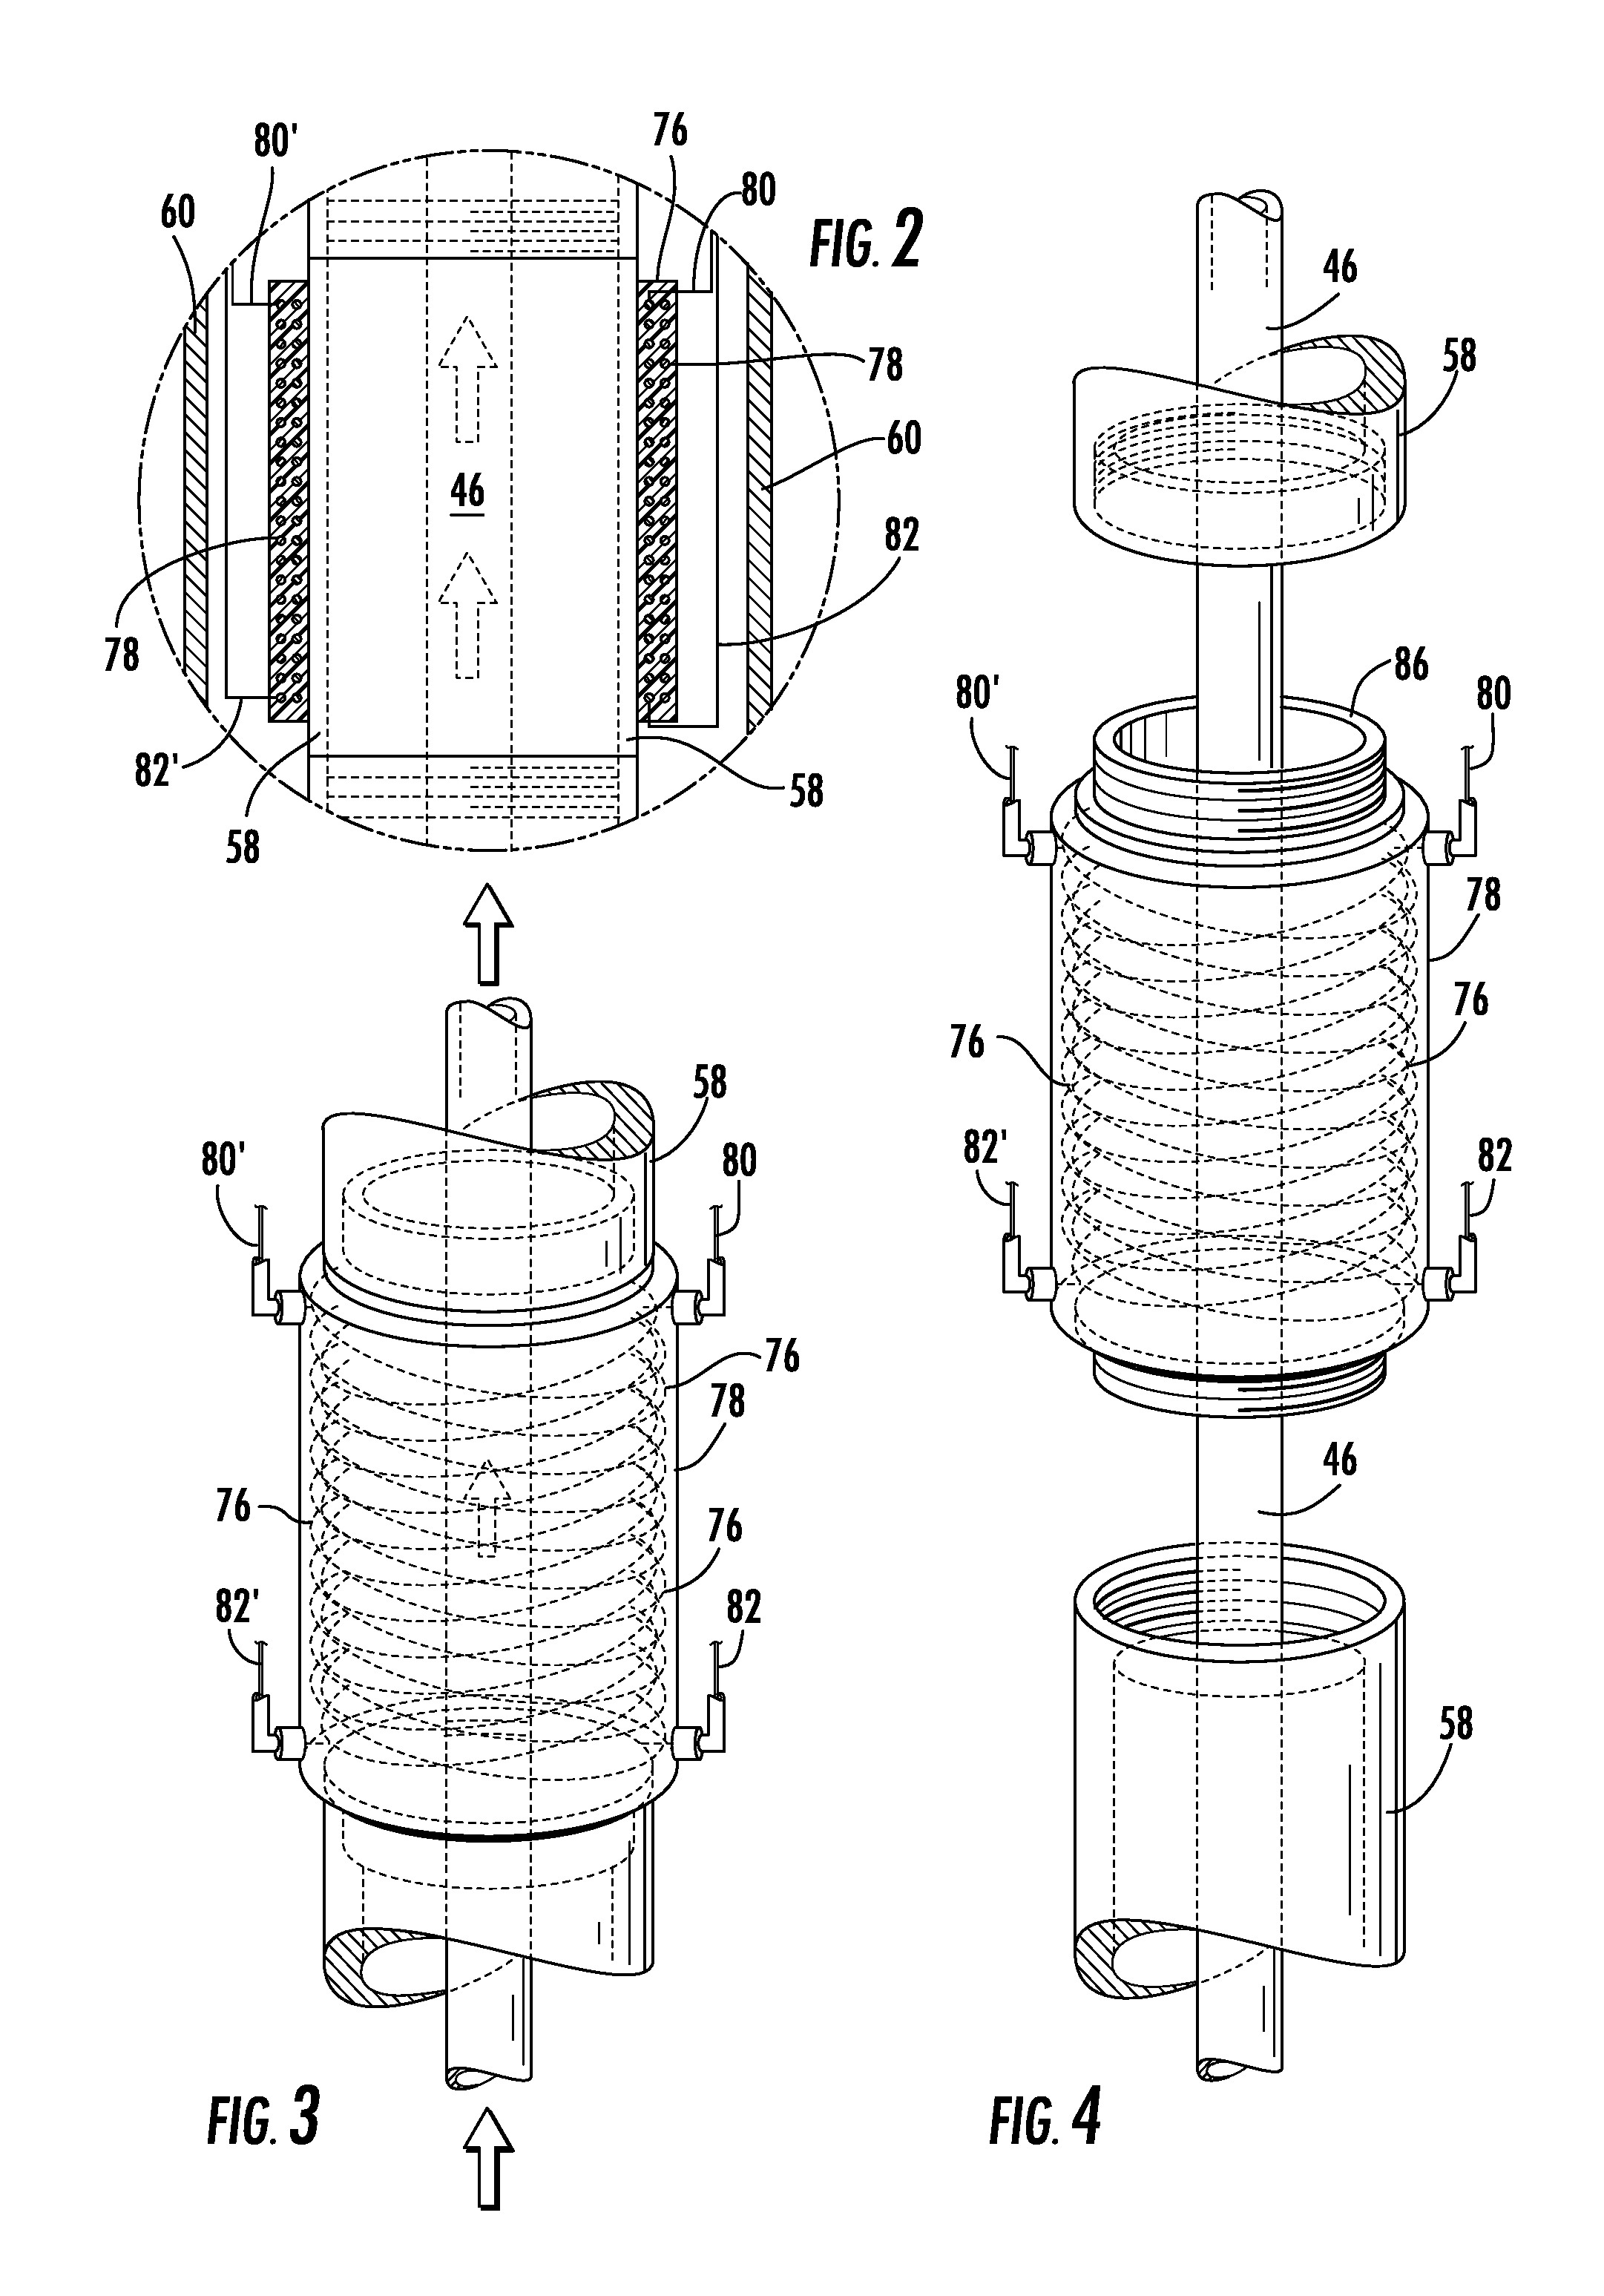 Apparatus and method for magnetically conditioning fluids